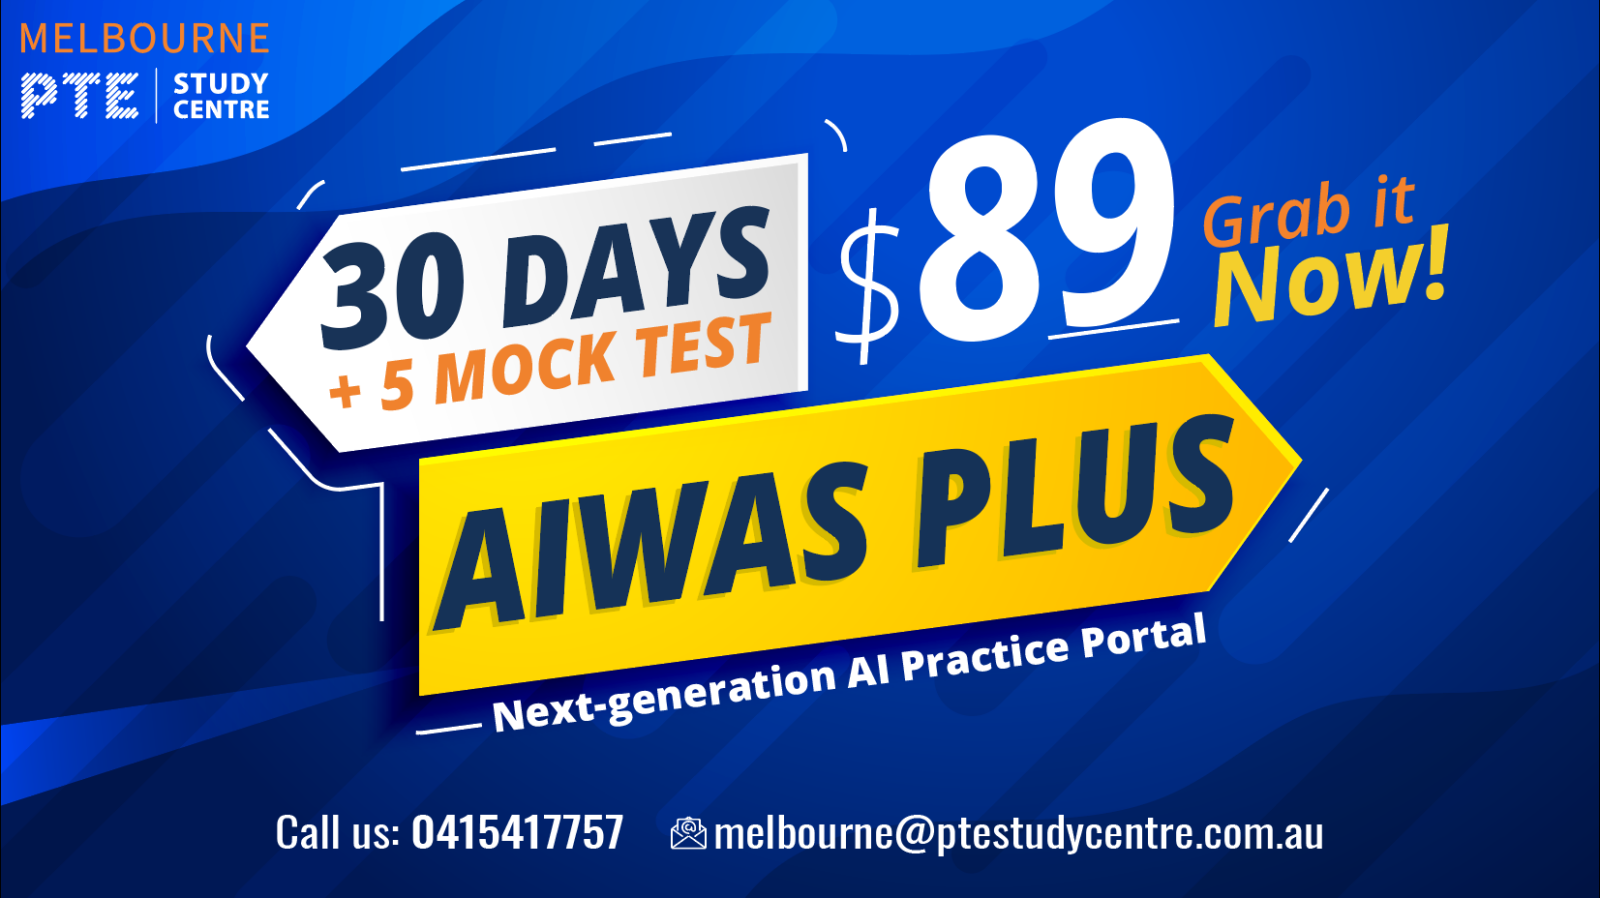 30 Days Full access to AIWAS Plus with 5 FULL Mock Test at $89 ONLY!